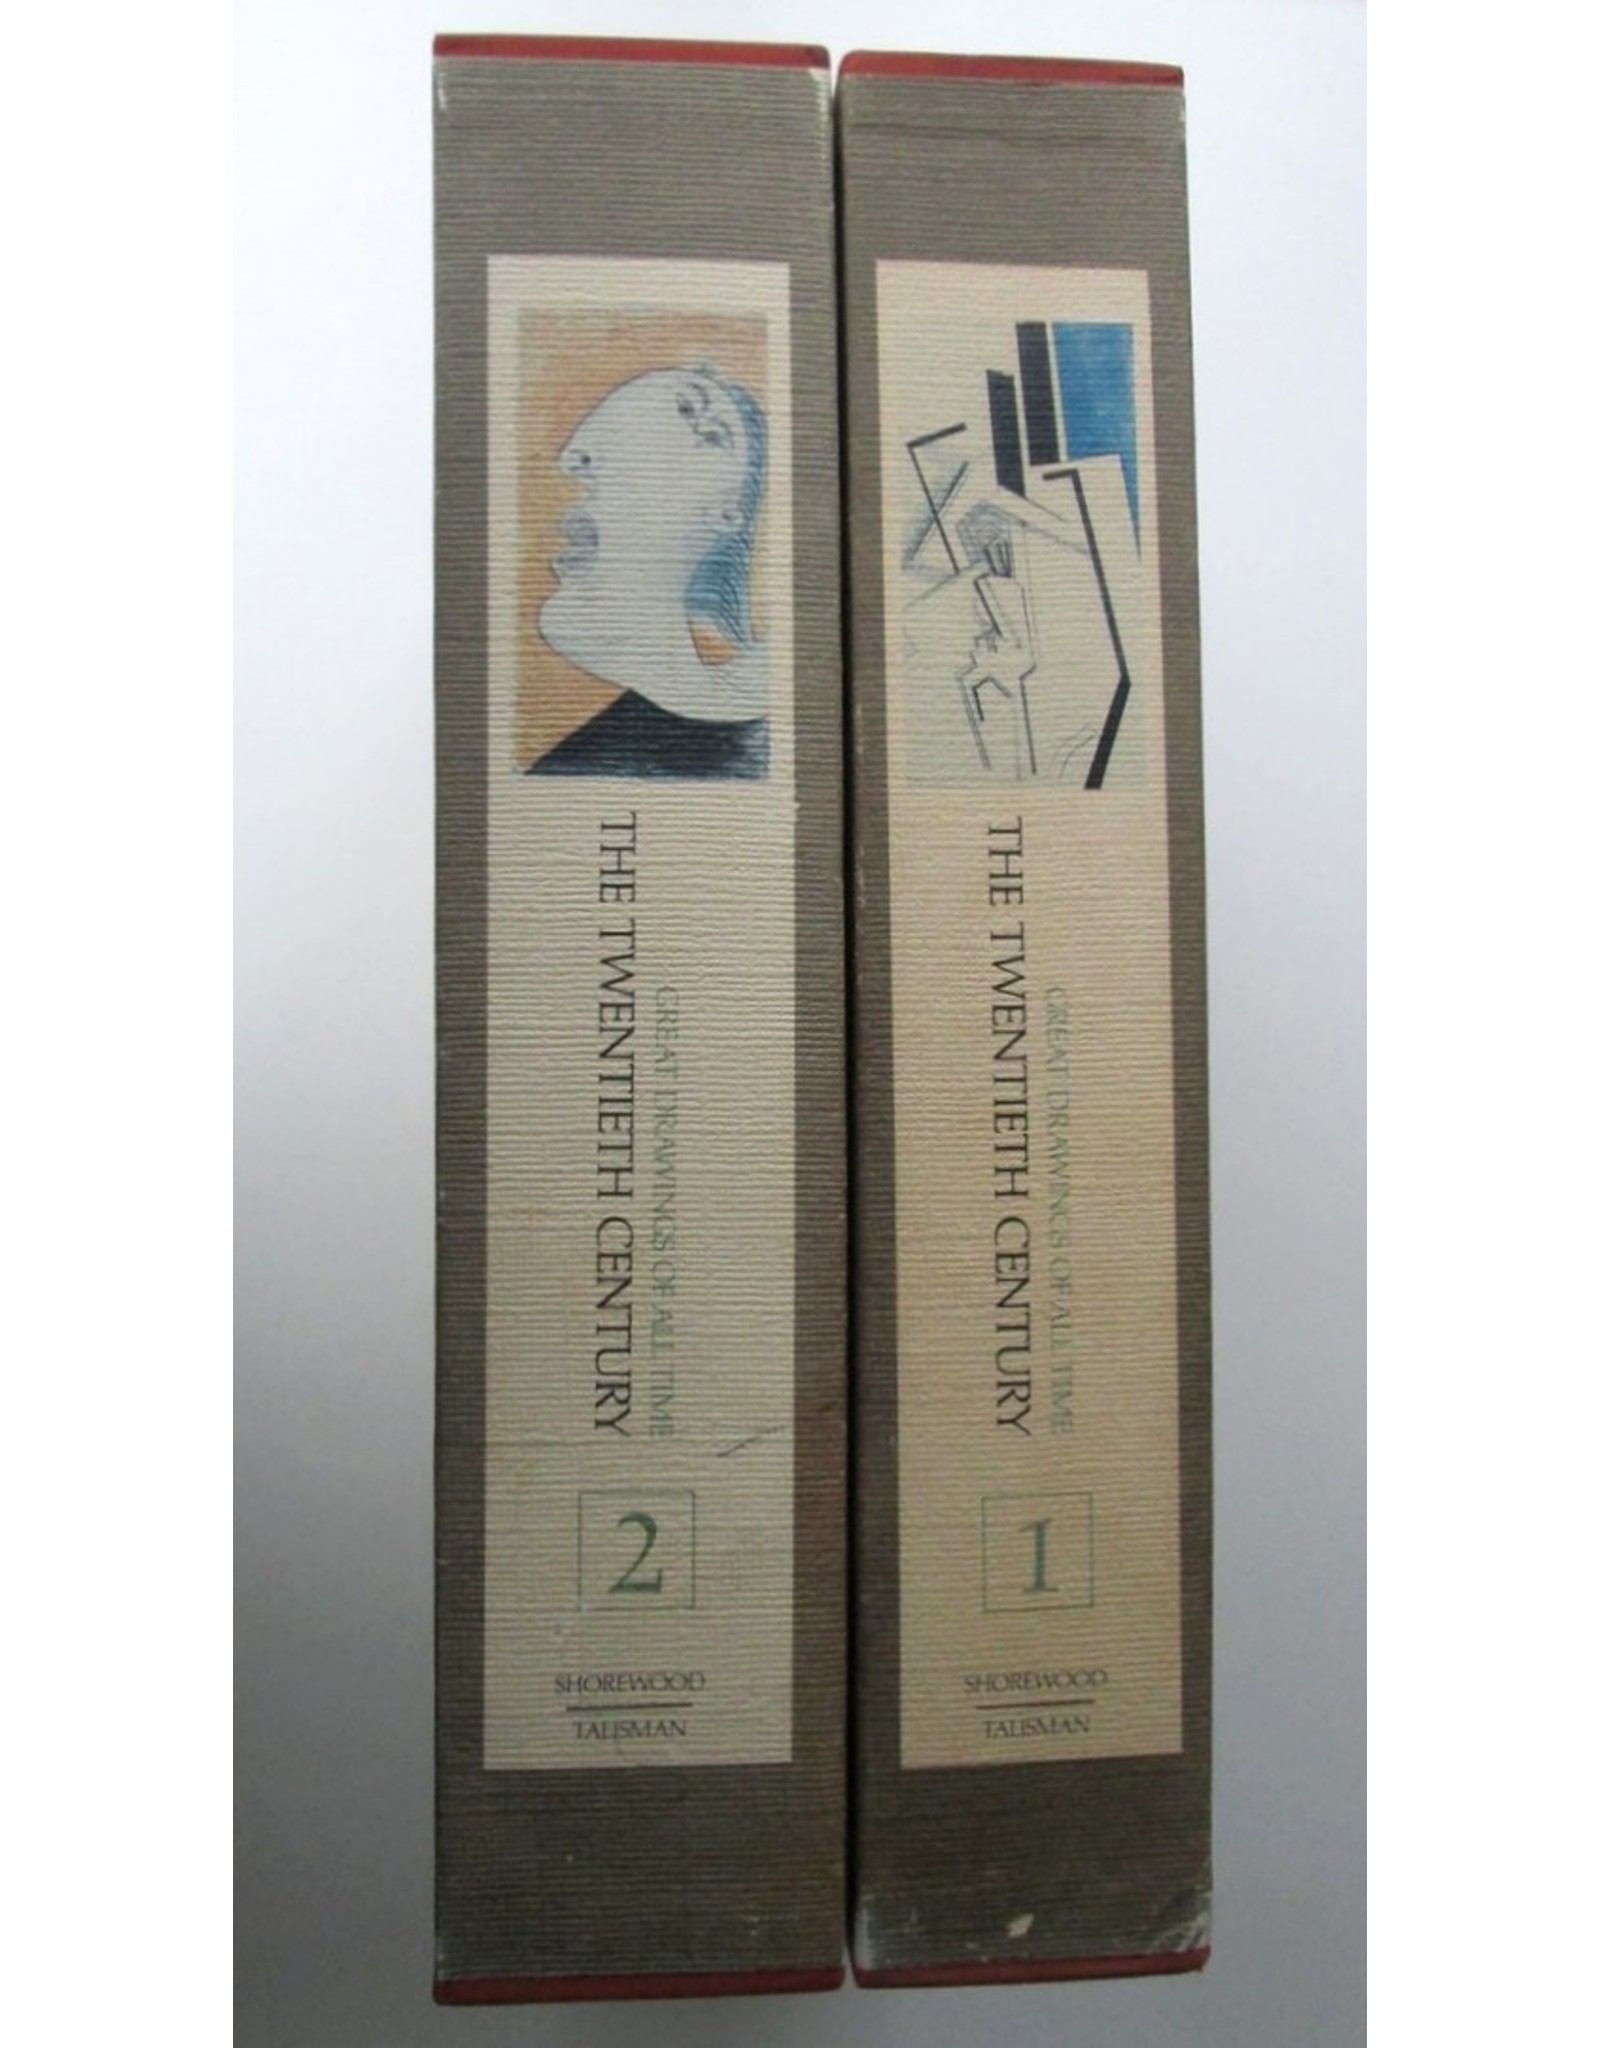 Victoria Thorson - Great Drawings of All Time: The Twentieth Century Volume 1 & 2